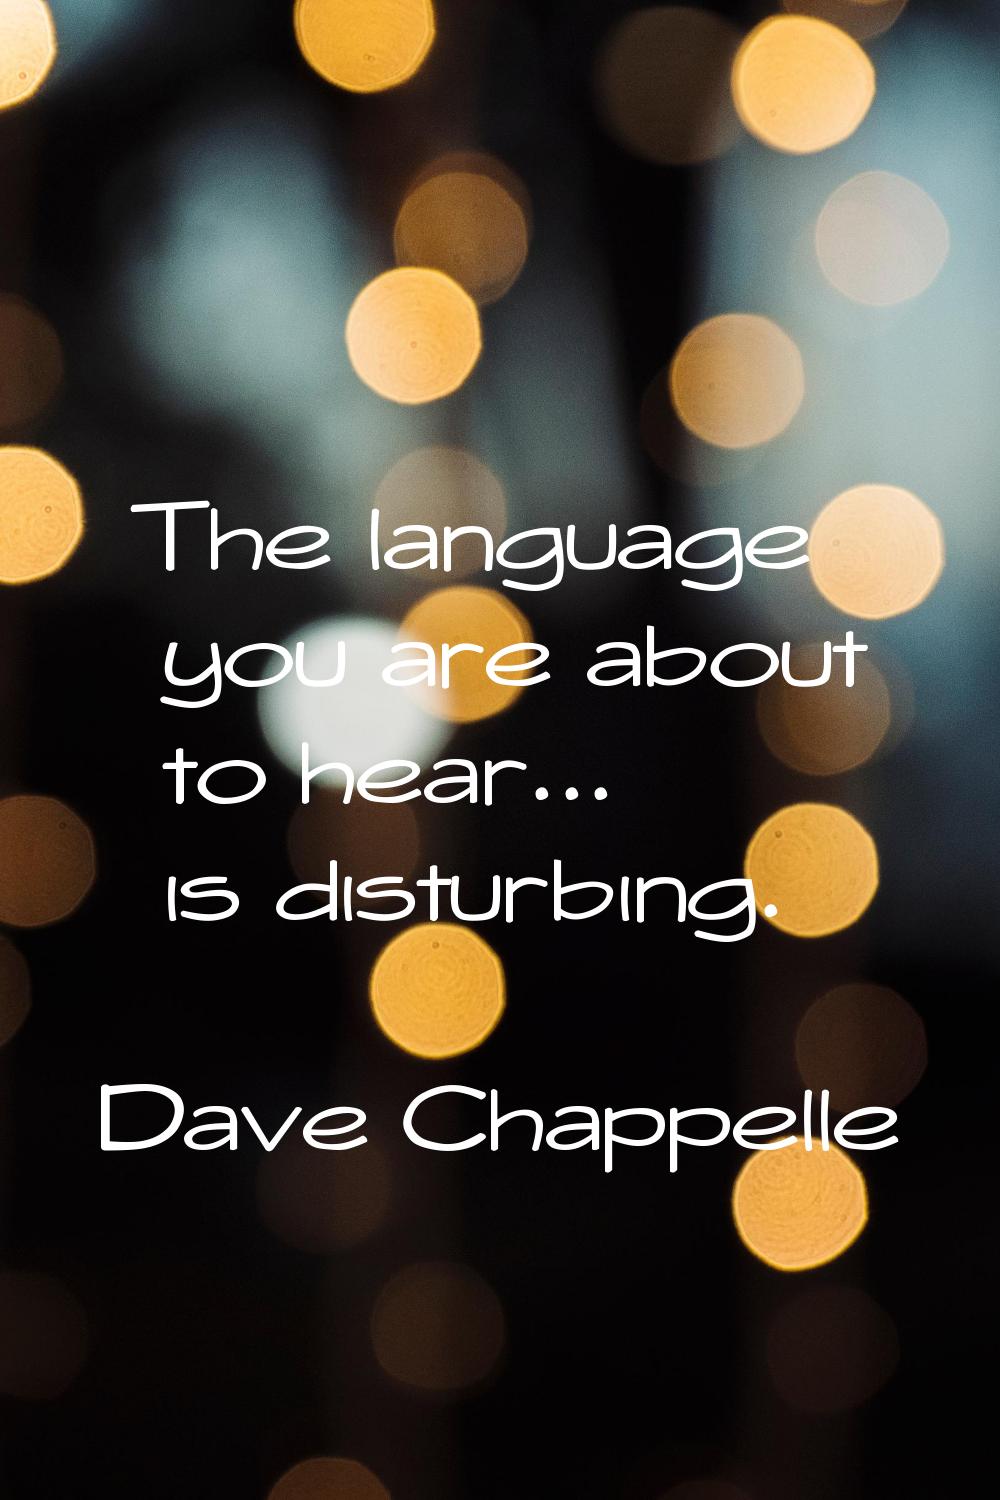 The language you are about to hear... is disturbing.